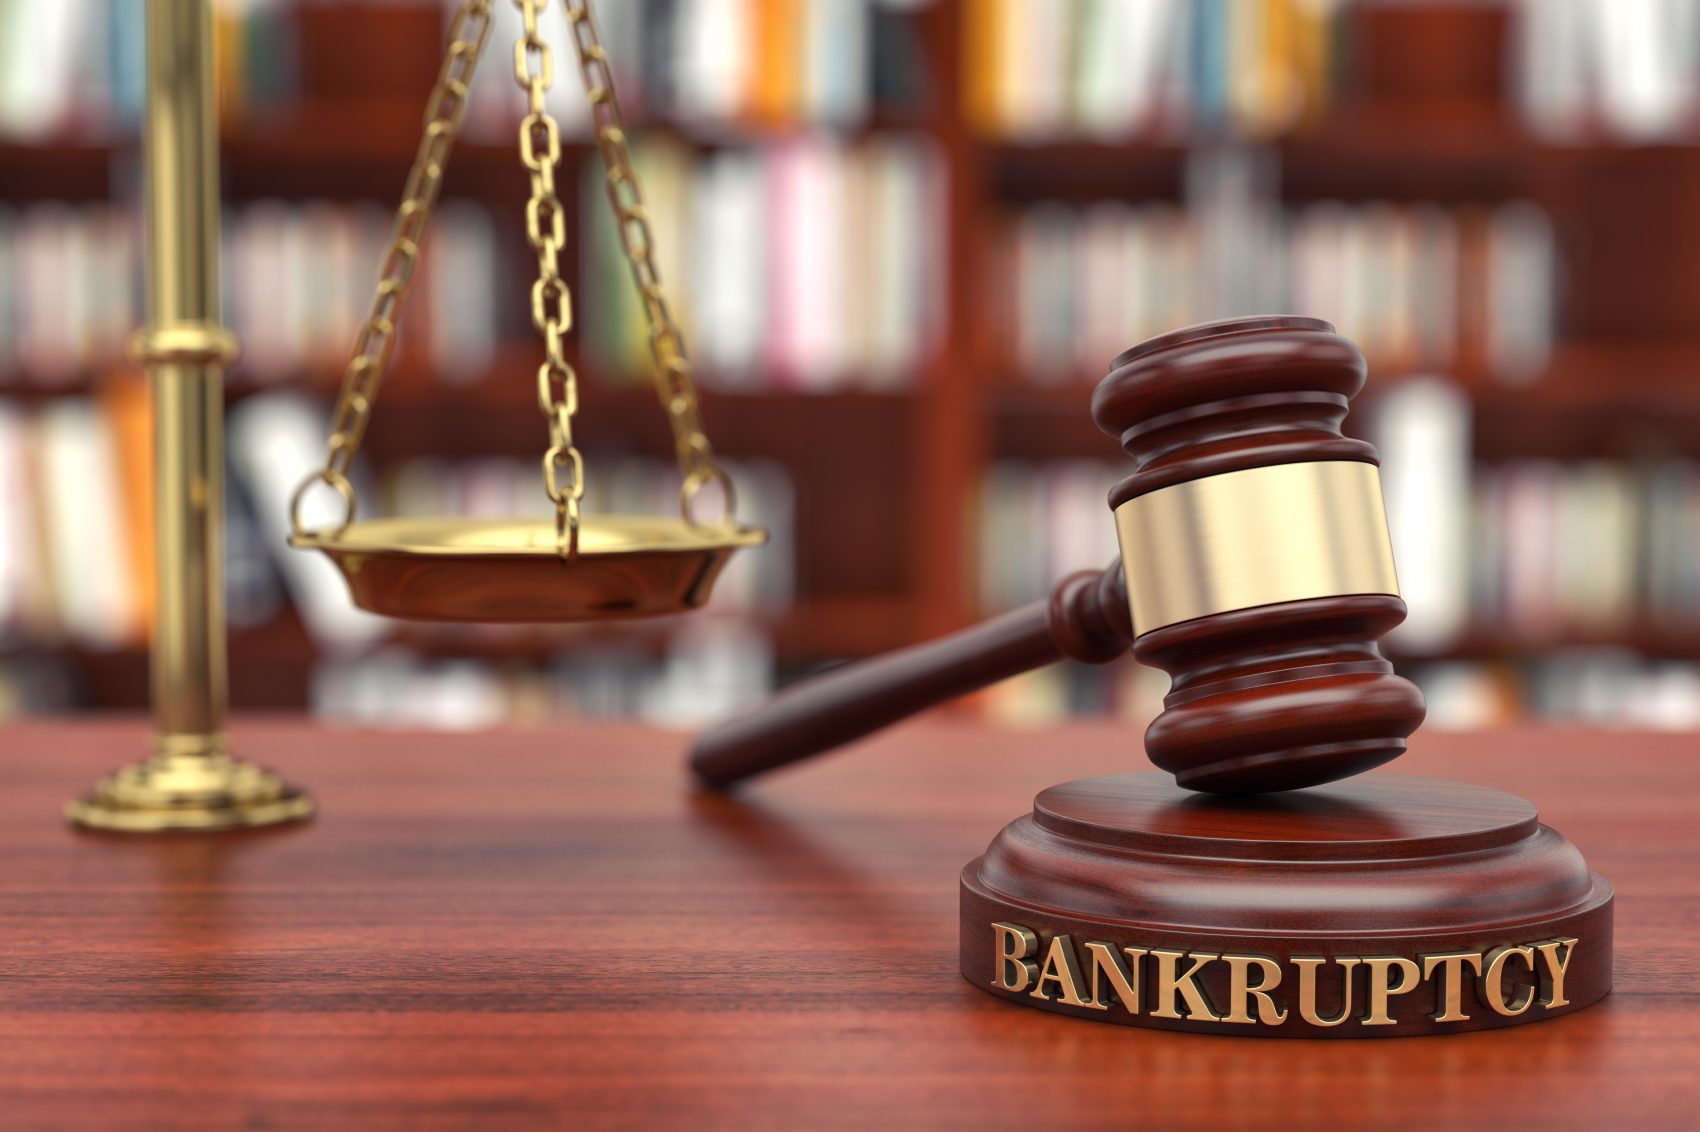 Common Myths About Bankruptcy